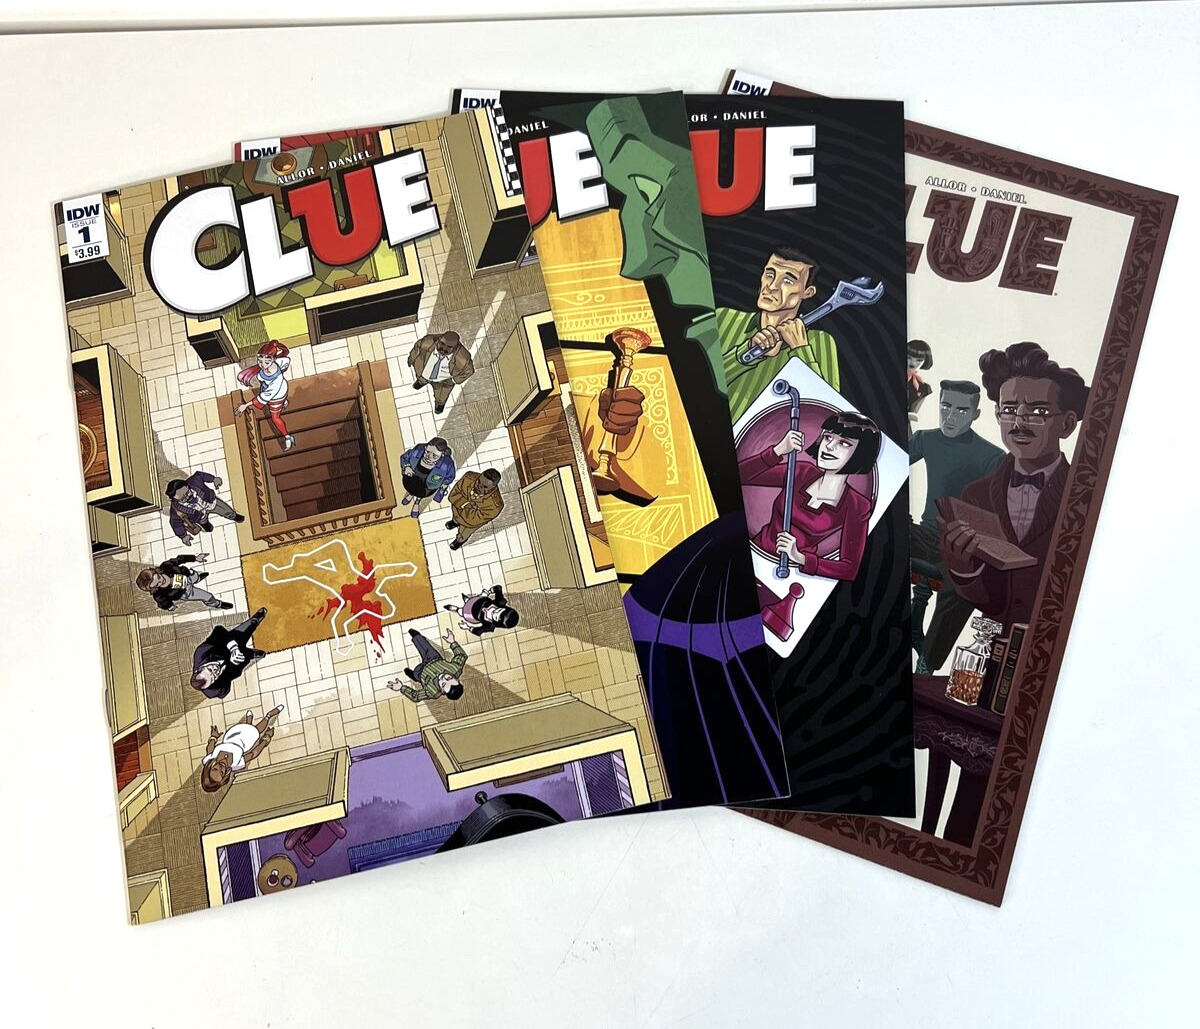 CLUE COMIC IDW 2017 ISSUES #1-#4 (4 Comic lot) VARIANTS. Based on Hit Board Game